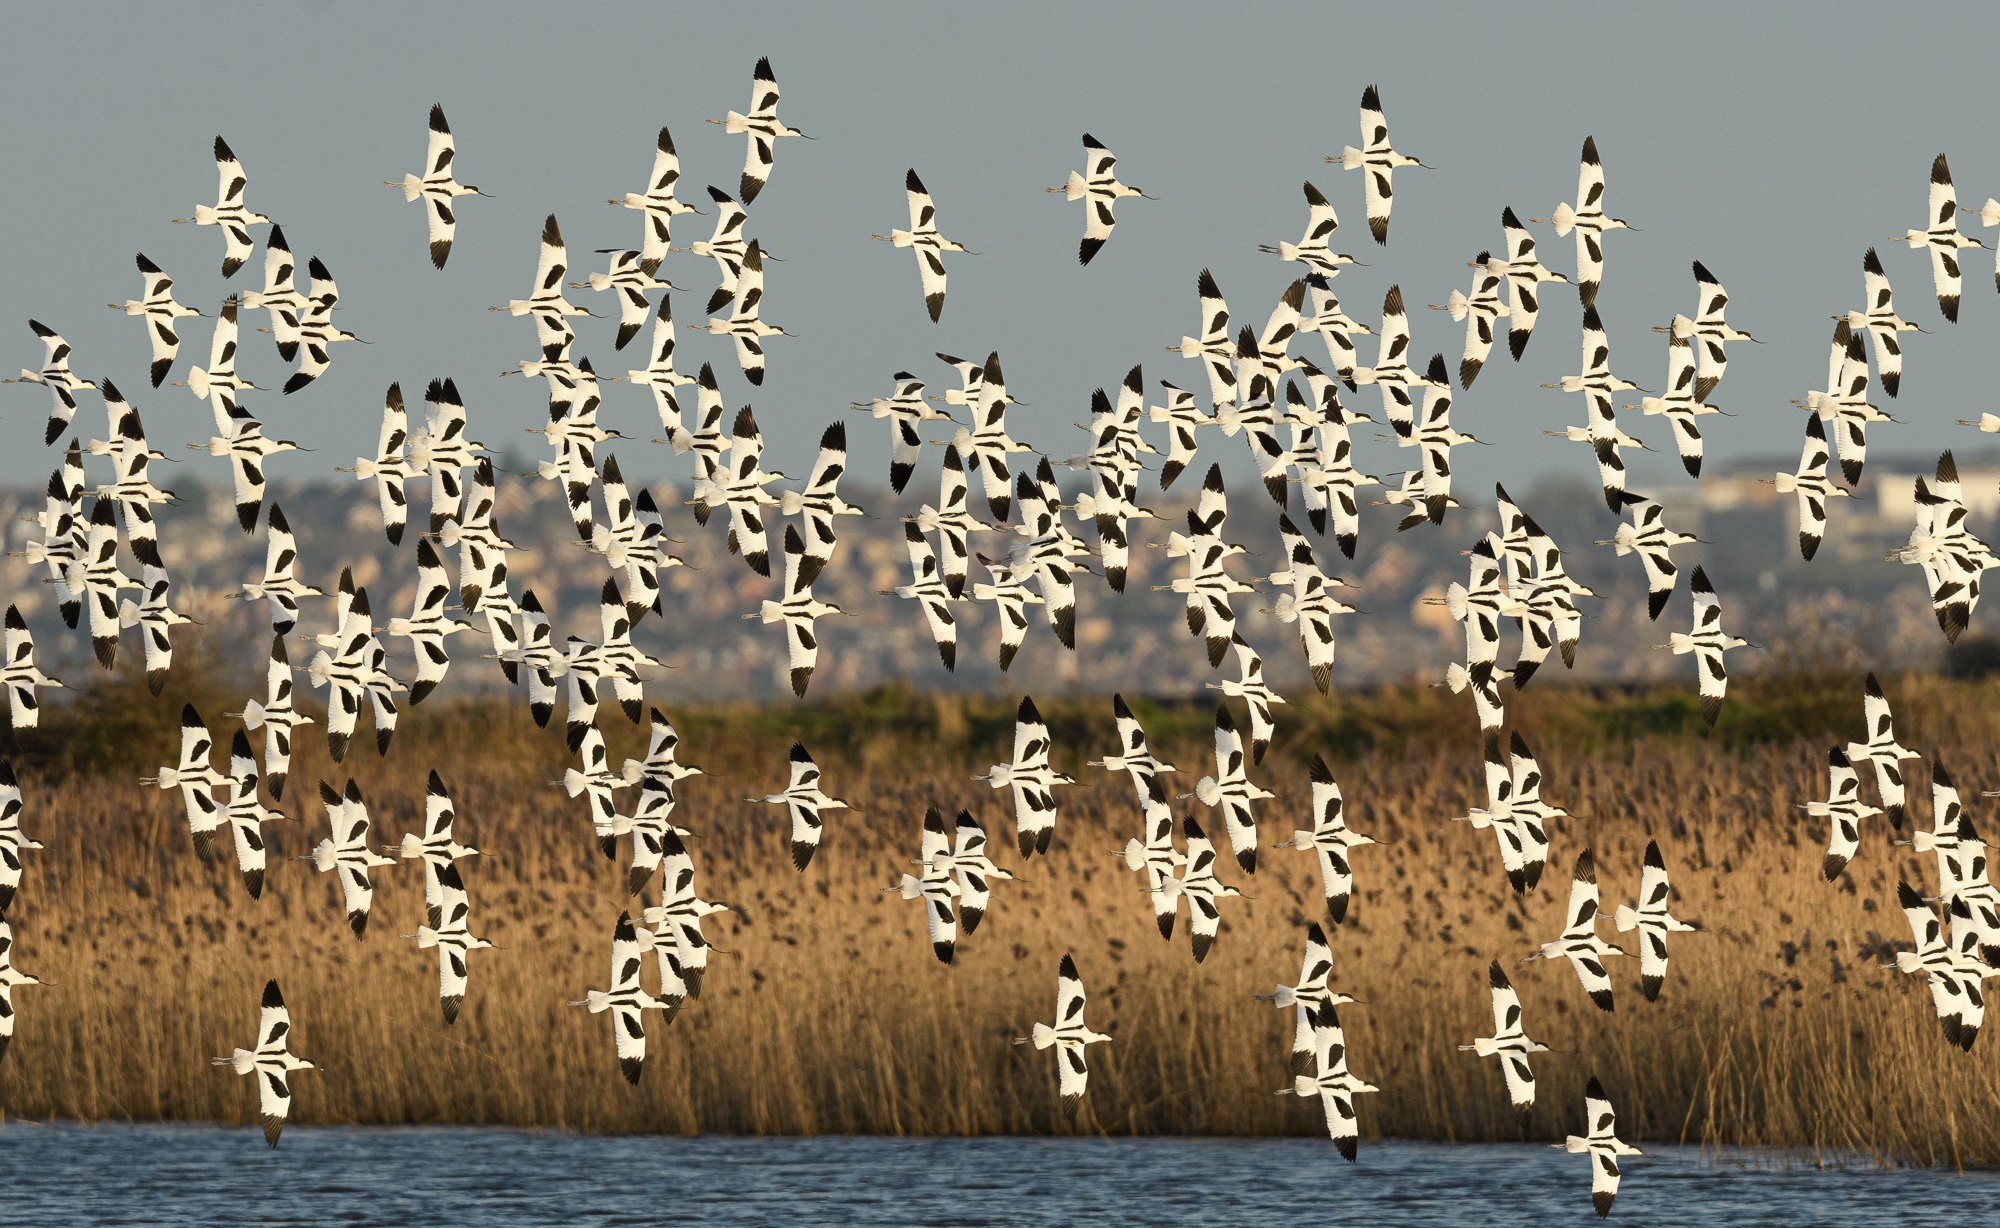 A flock of avocets (Recurvirostra avosetta) in flight above a lake, with reeds in the background